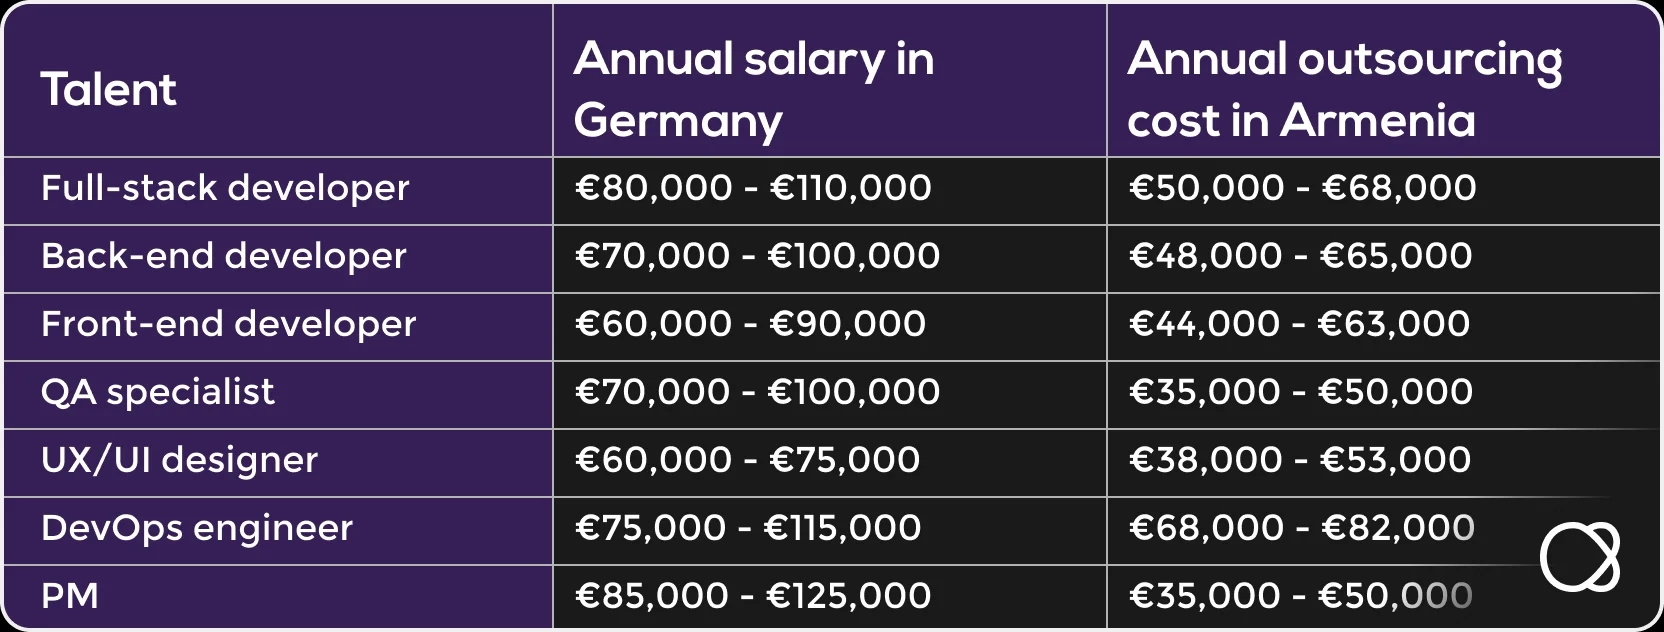 Comparison: Annual salary in Germany and software outsourcing costs to Armenia